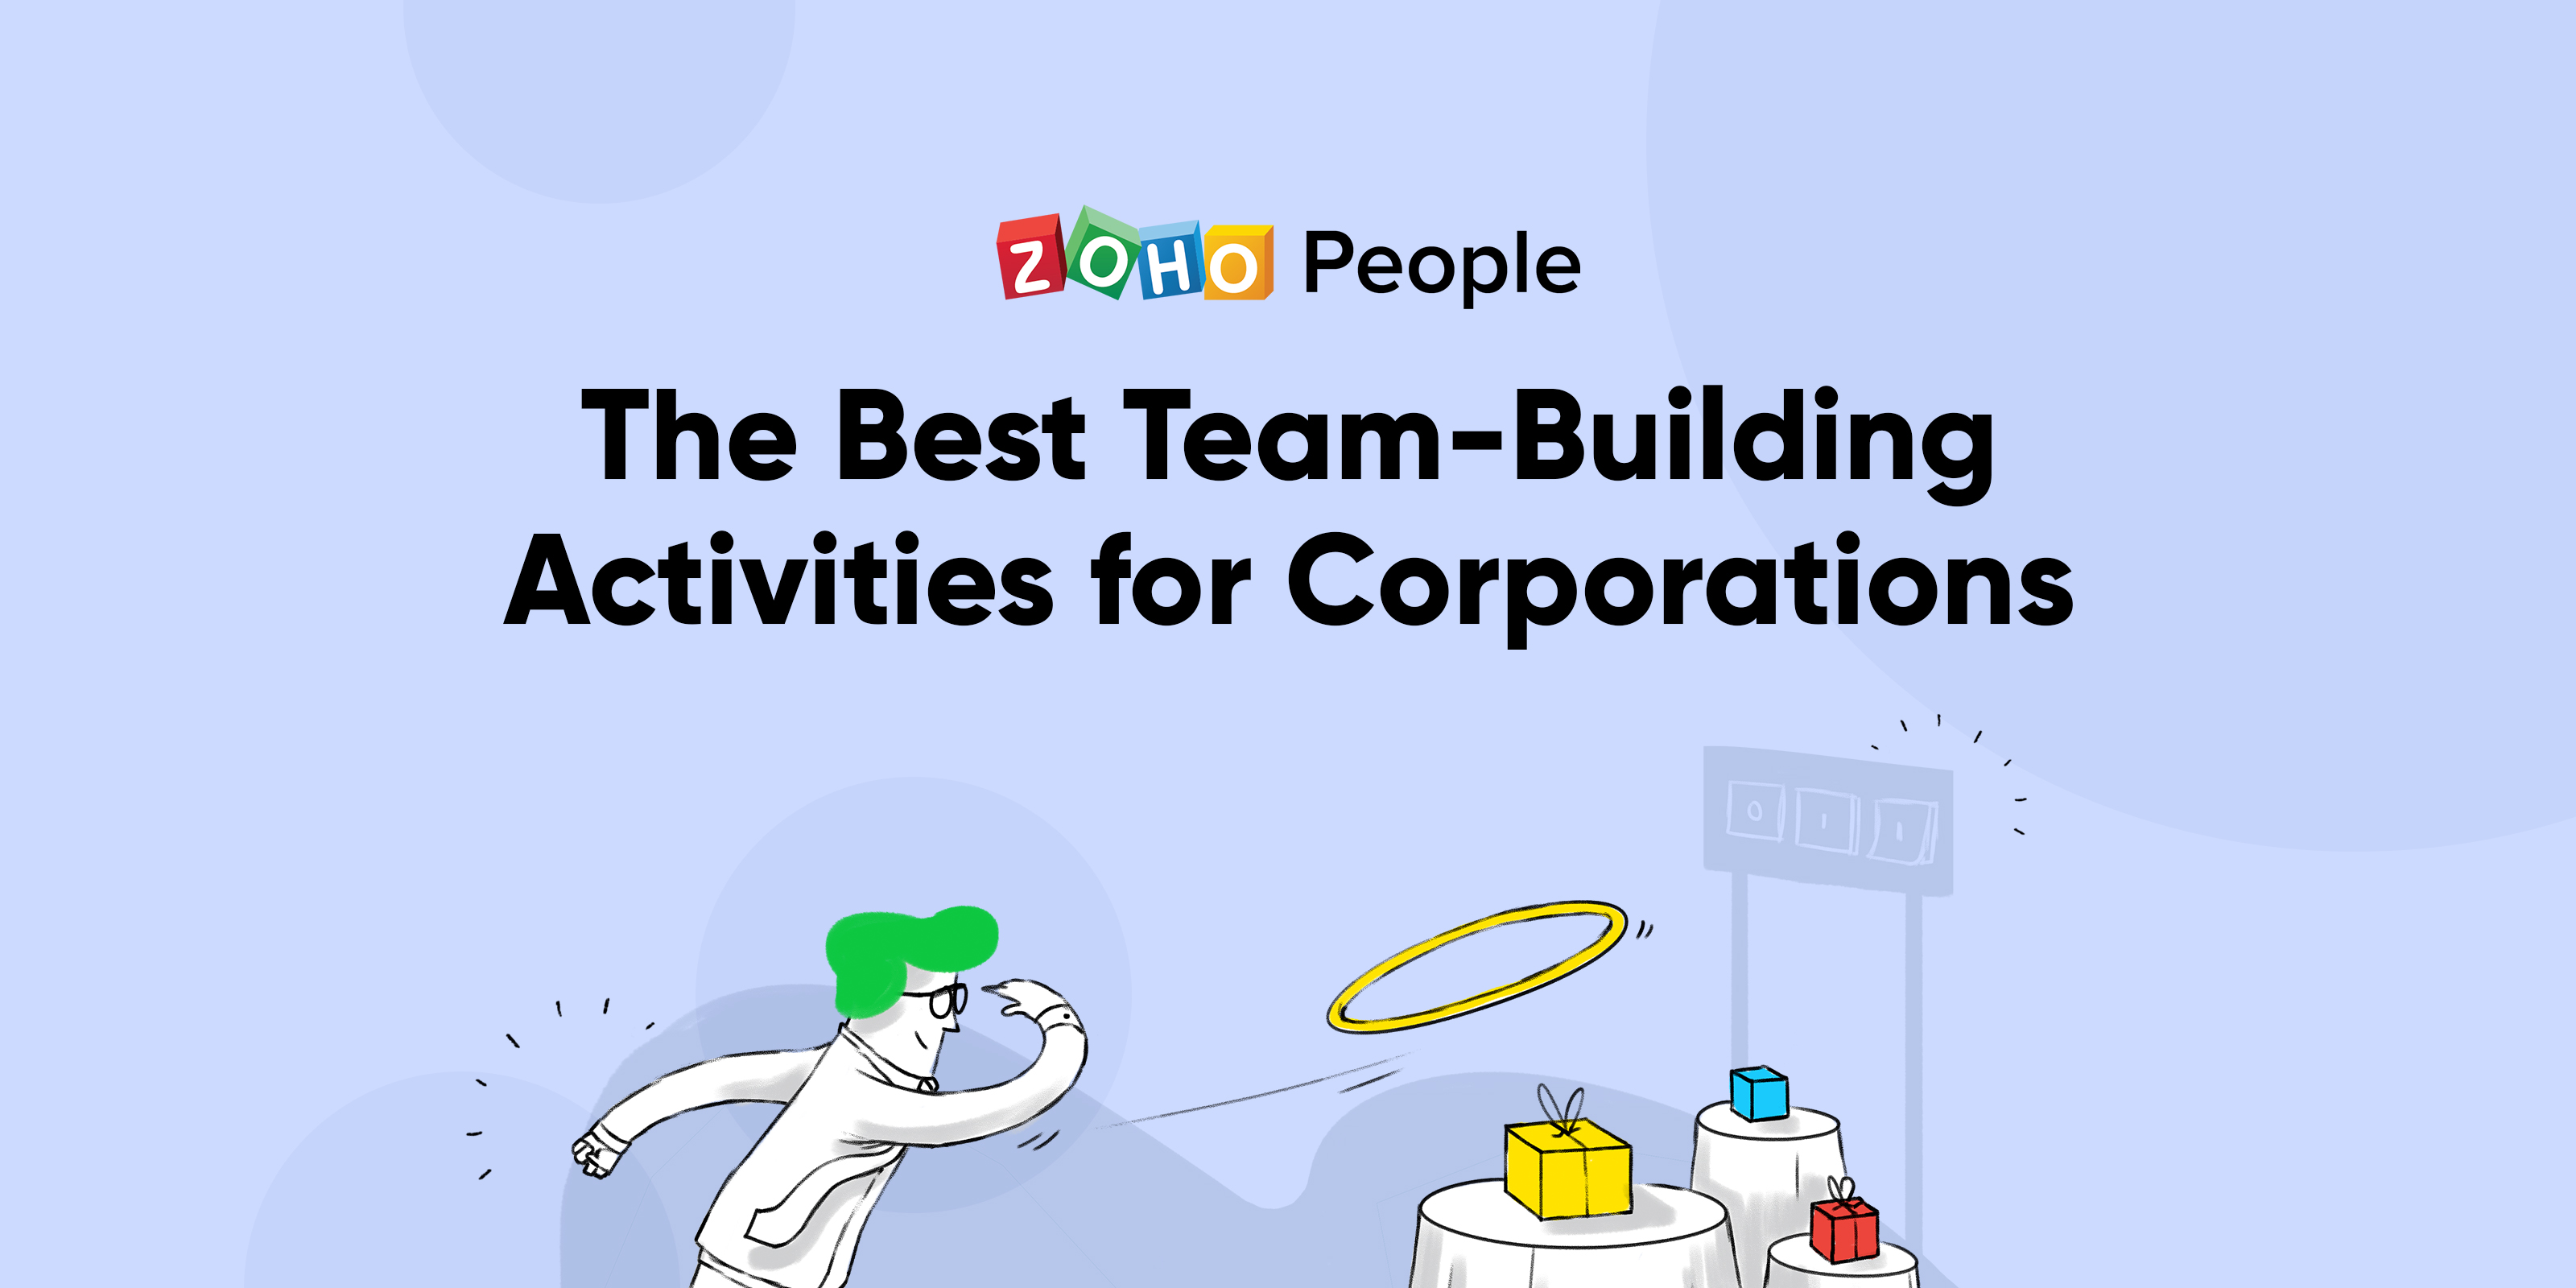 15 team-building activities for corporations.  